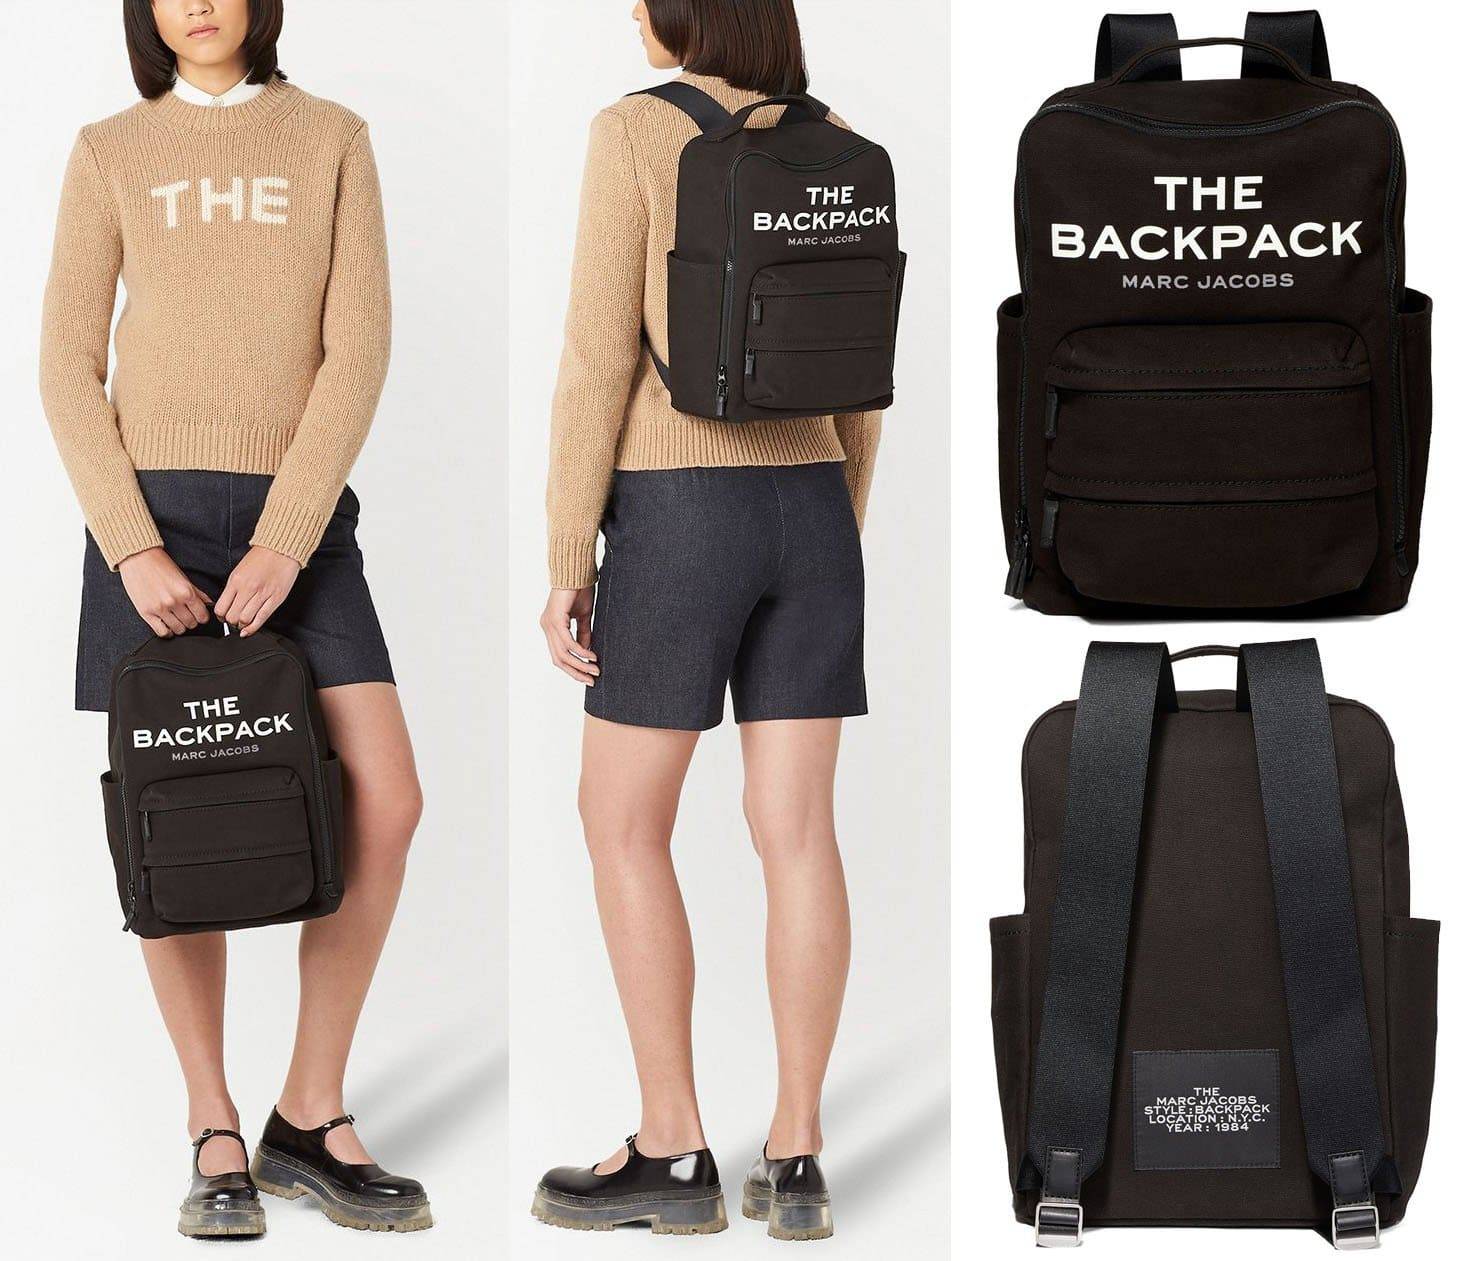  Marc Jacobs 'The Backpack' 